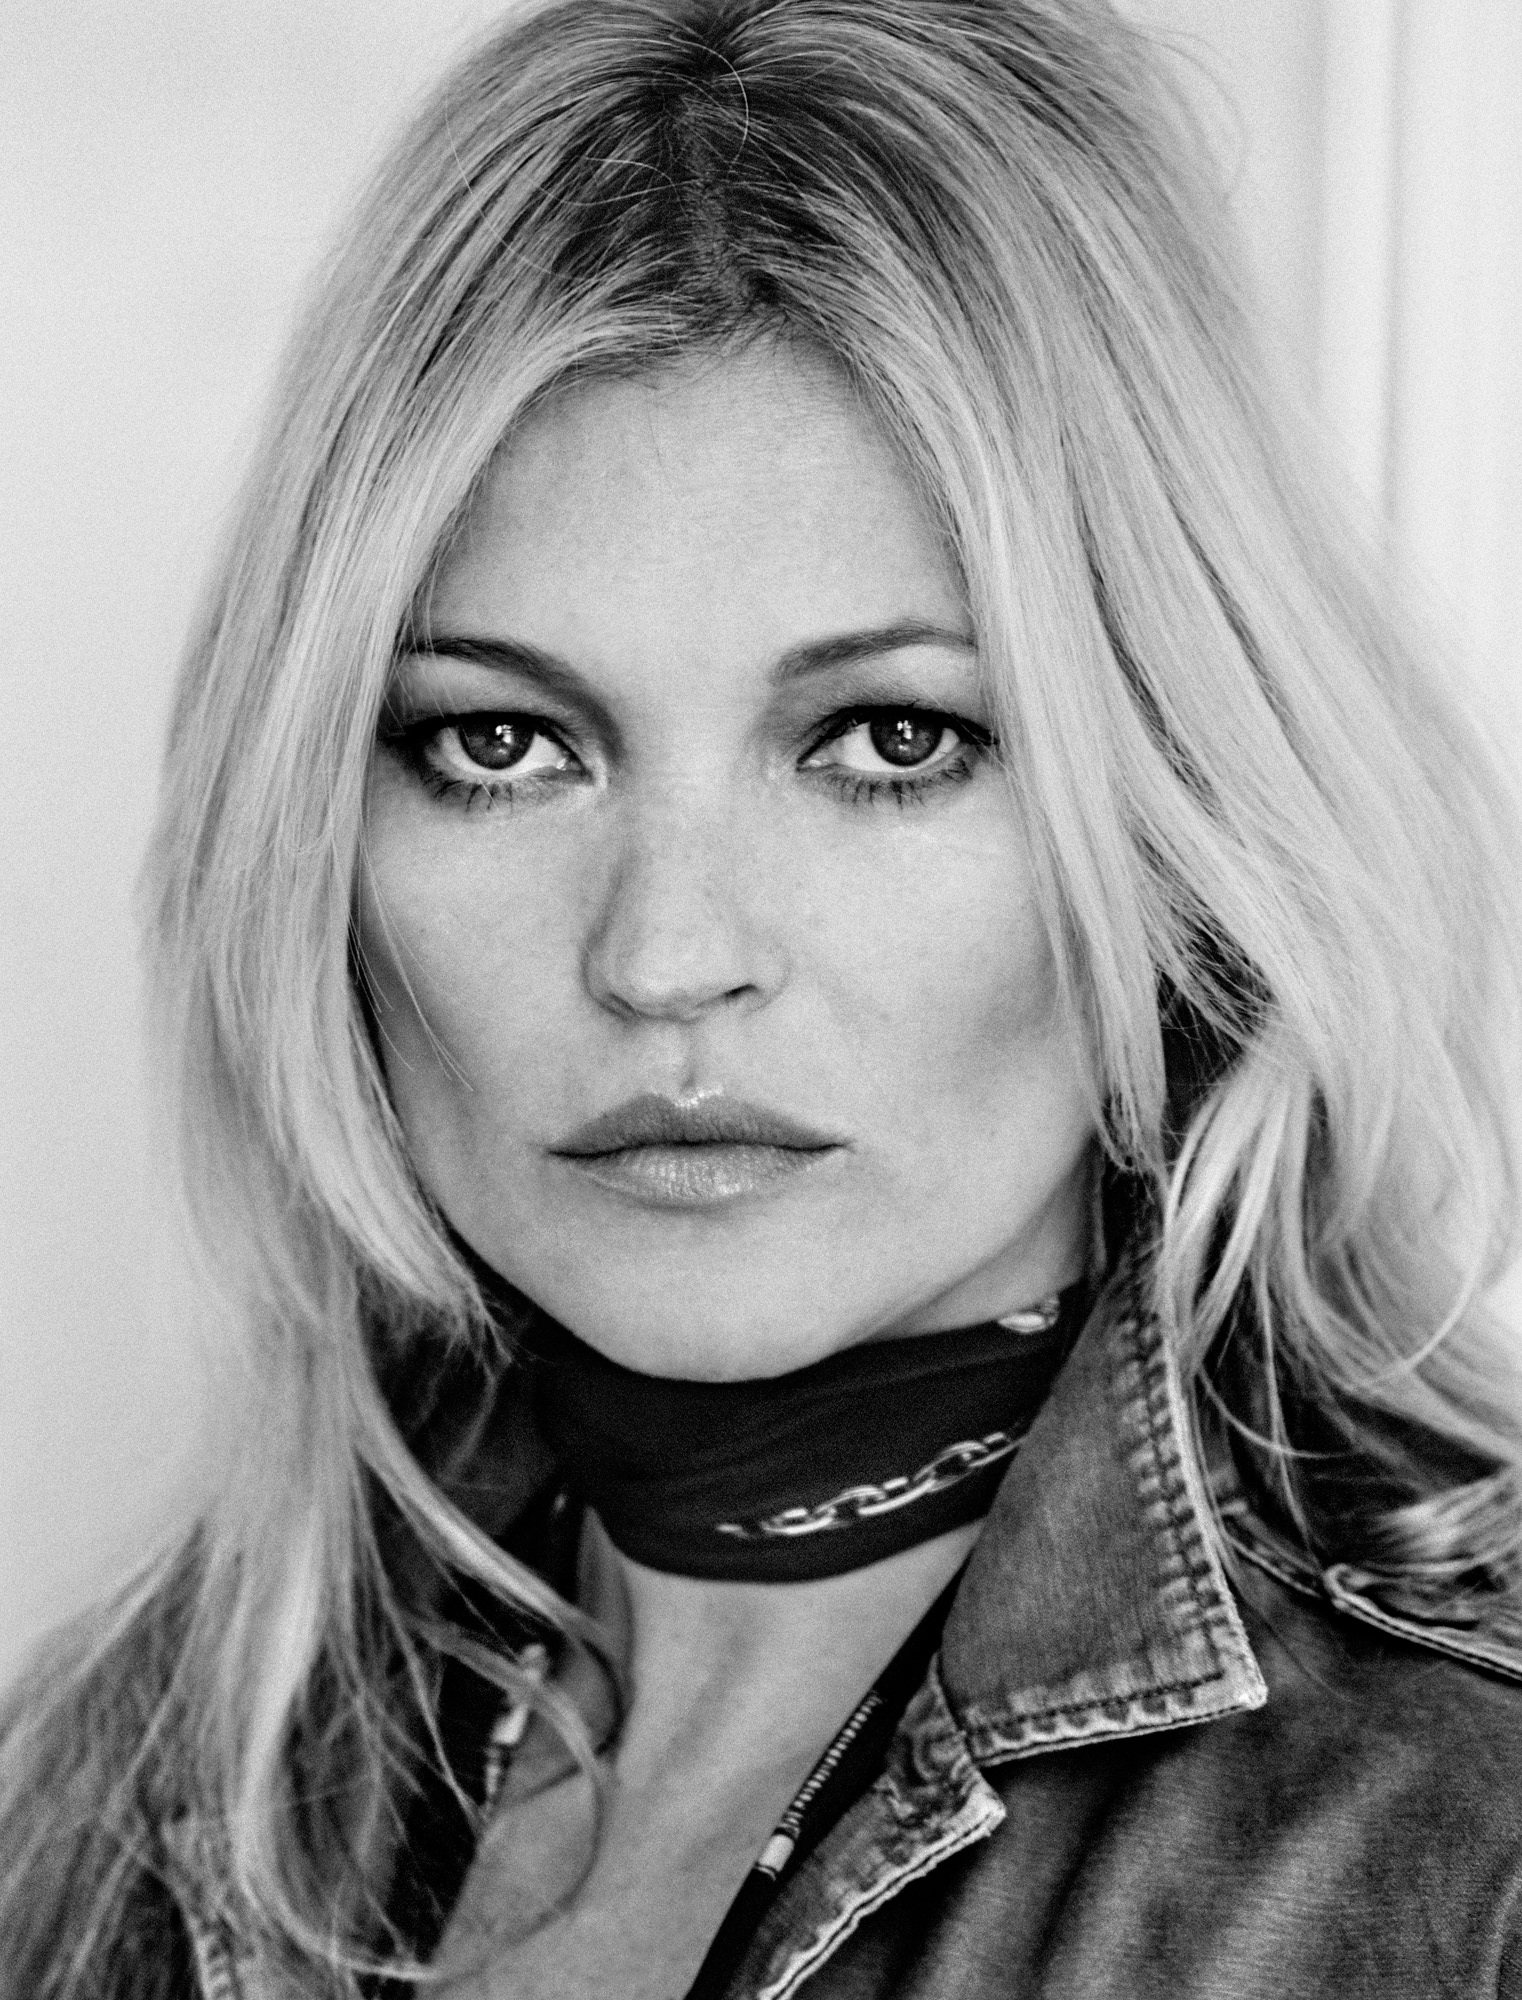 kate-moss-by-chris-colls-for-the-edit-june-2016-4.jpg